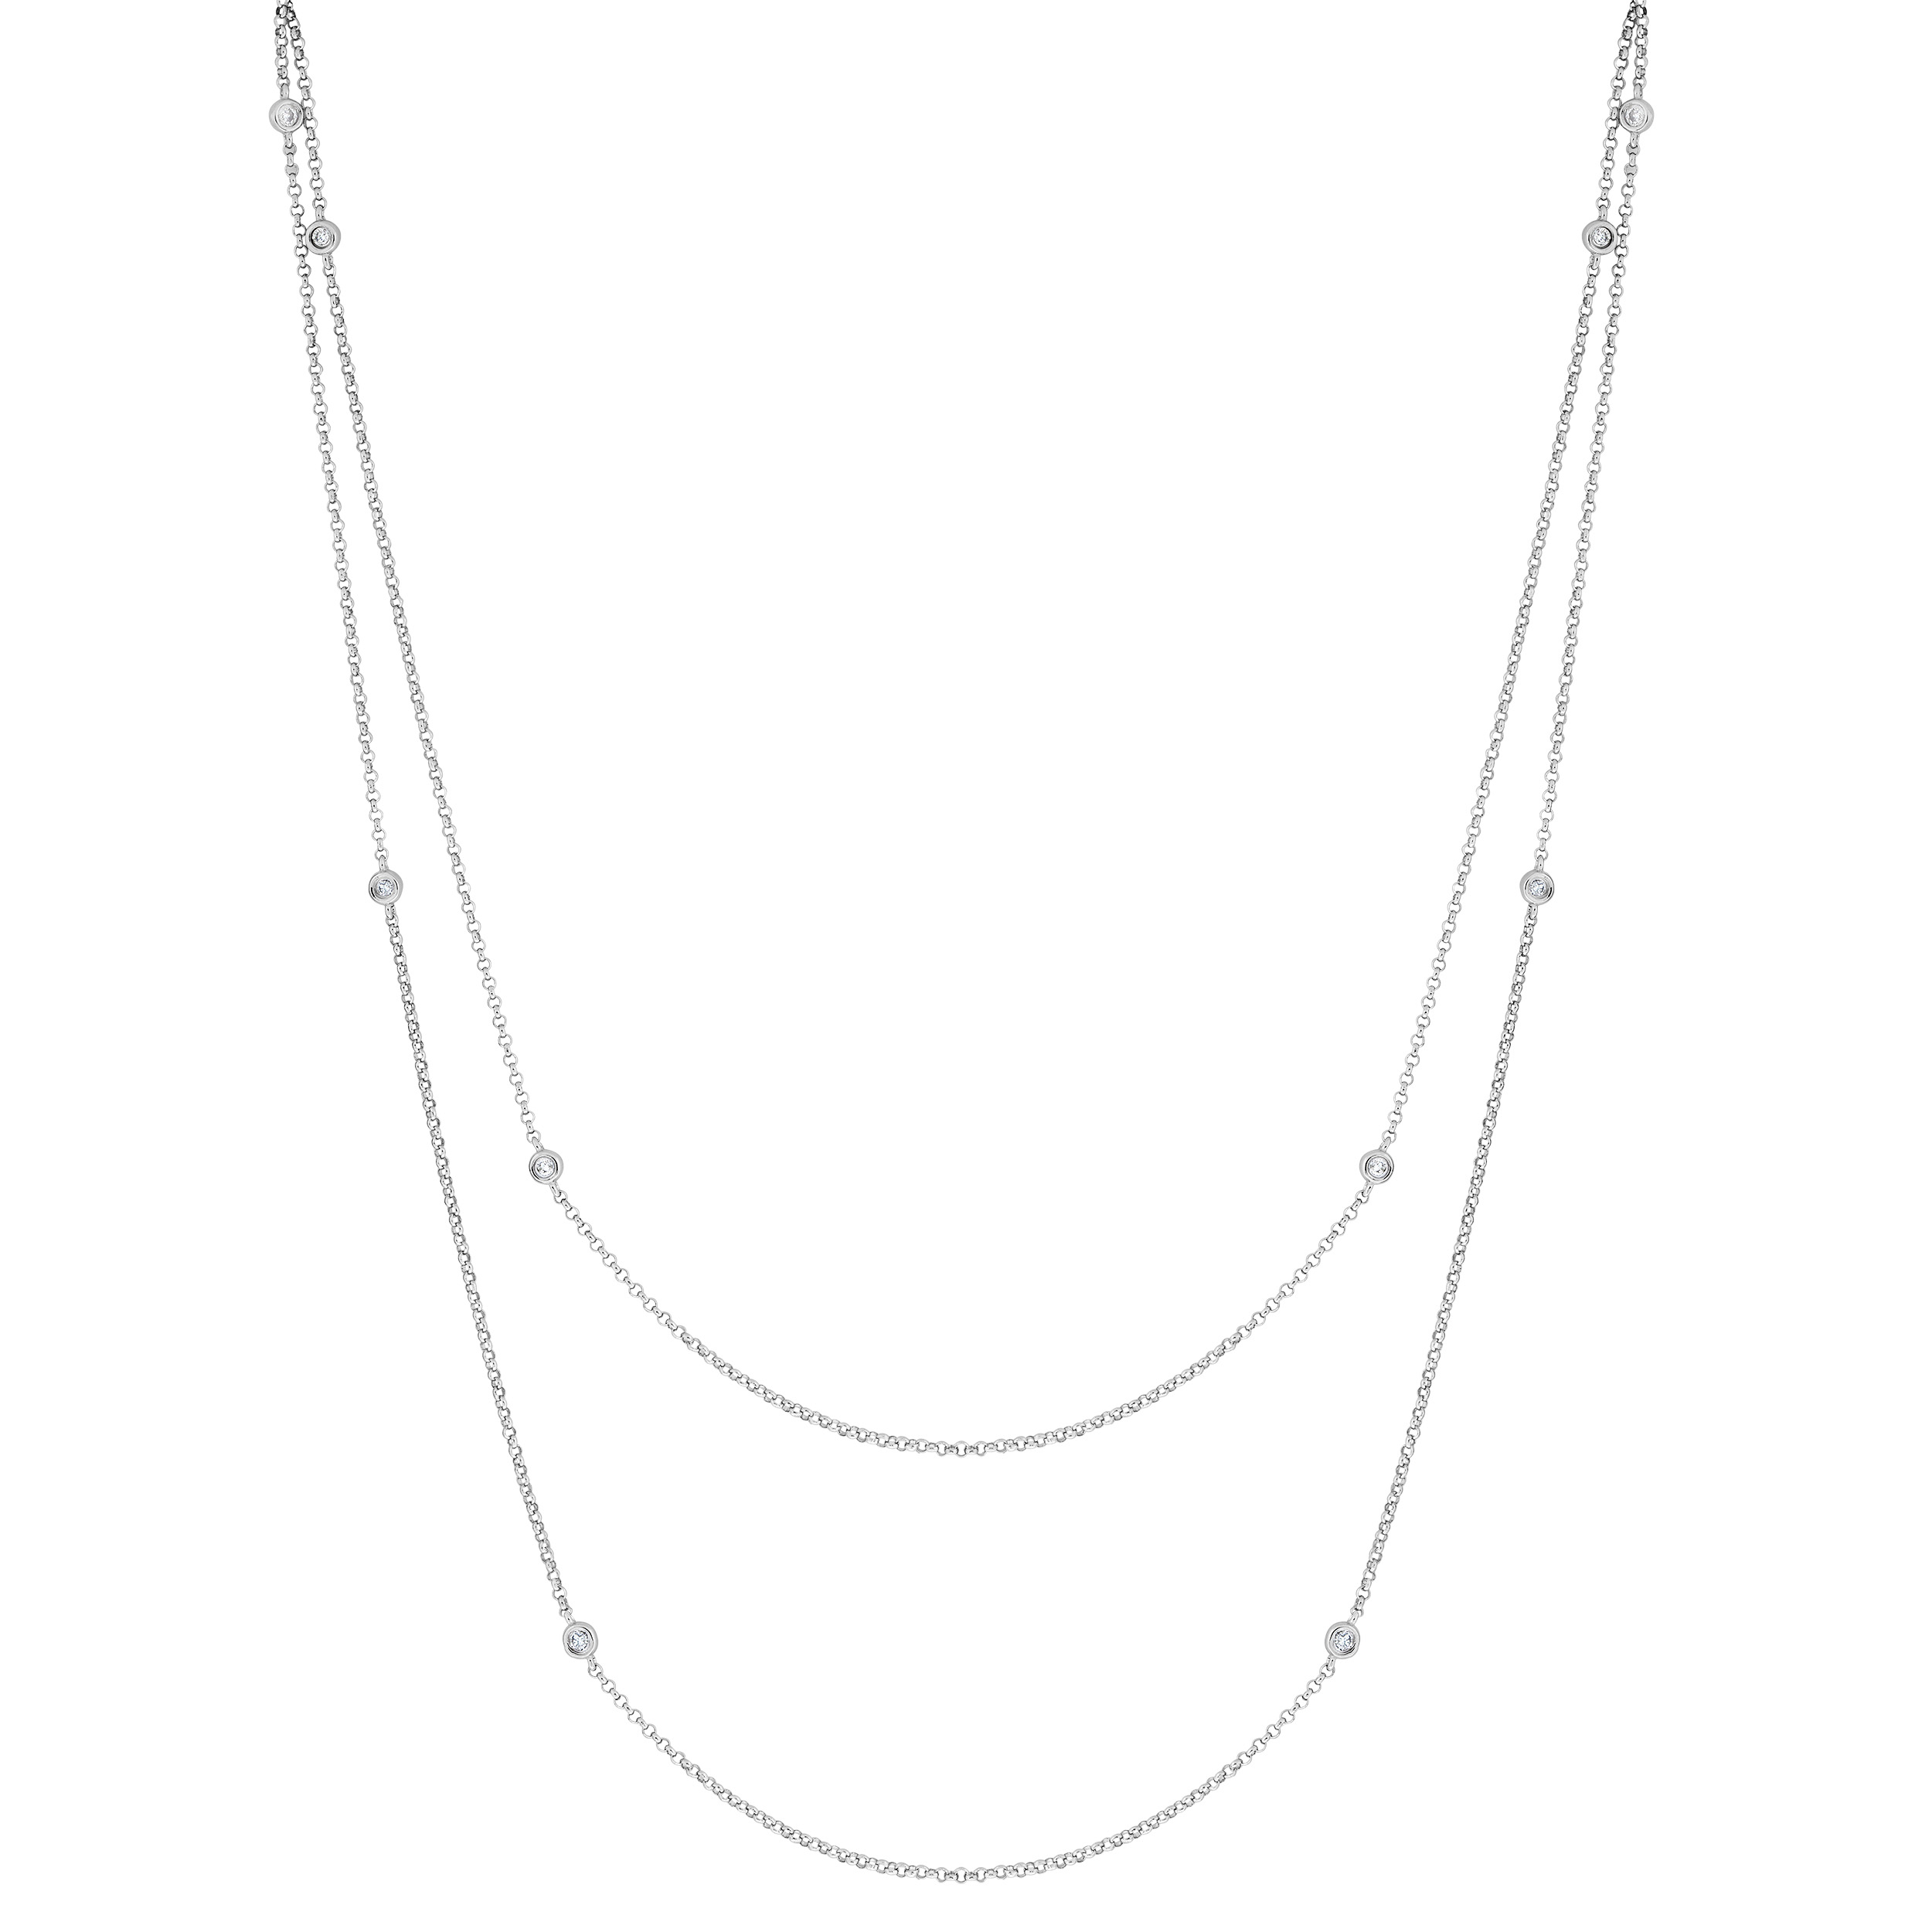 Diamond Layered Necklace, Rhodium Plated Sterling Silver